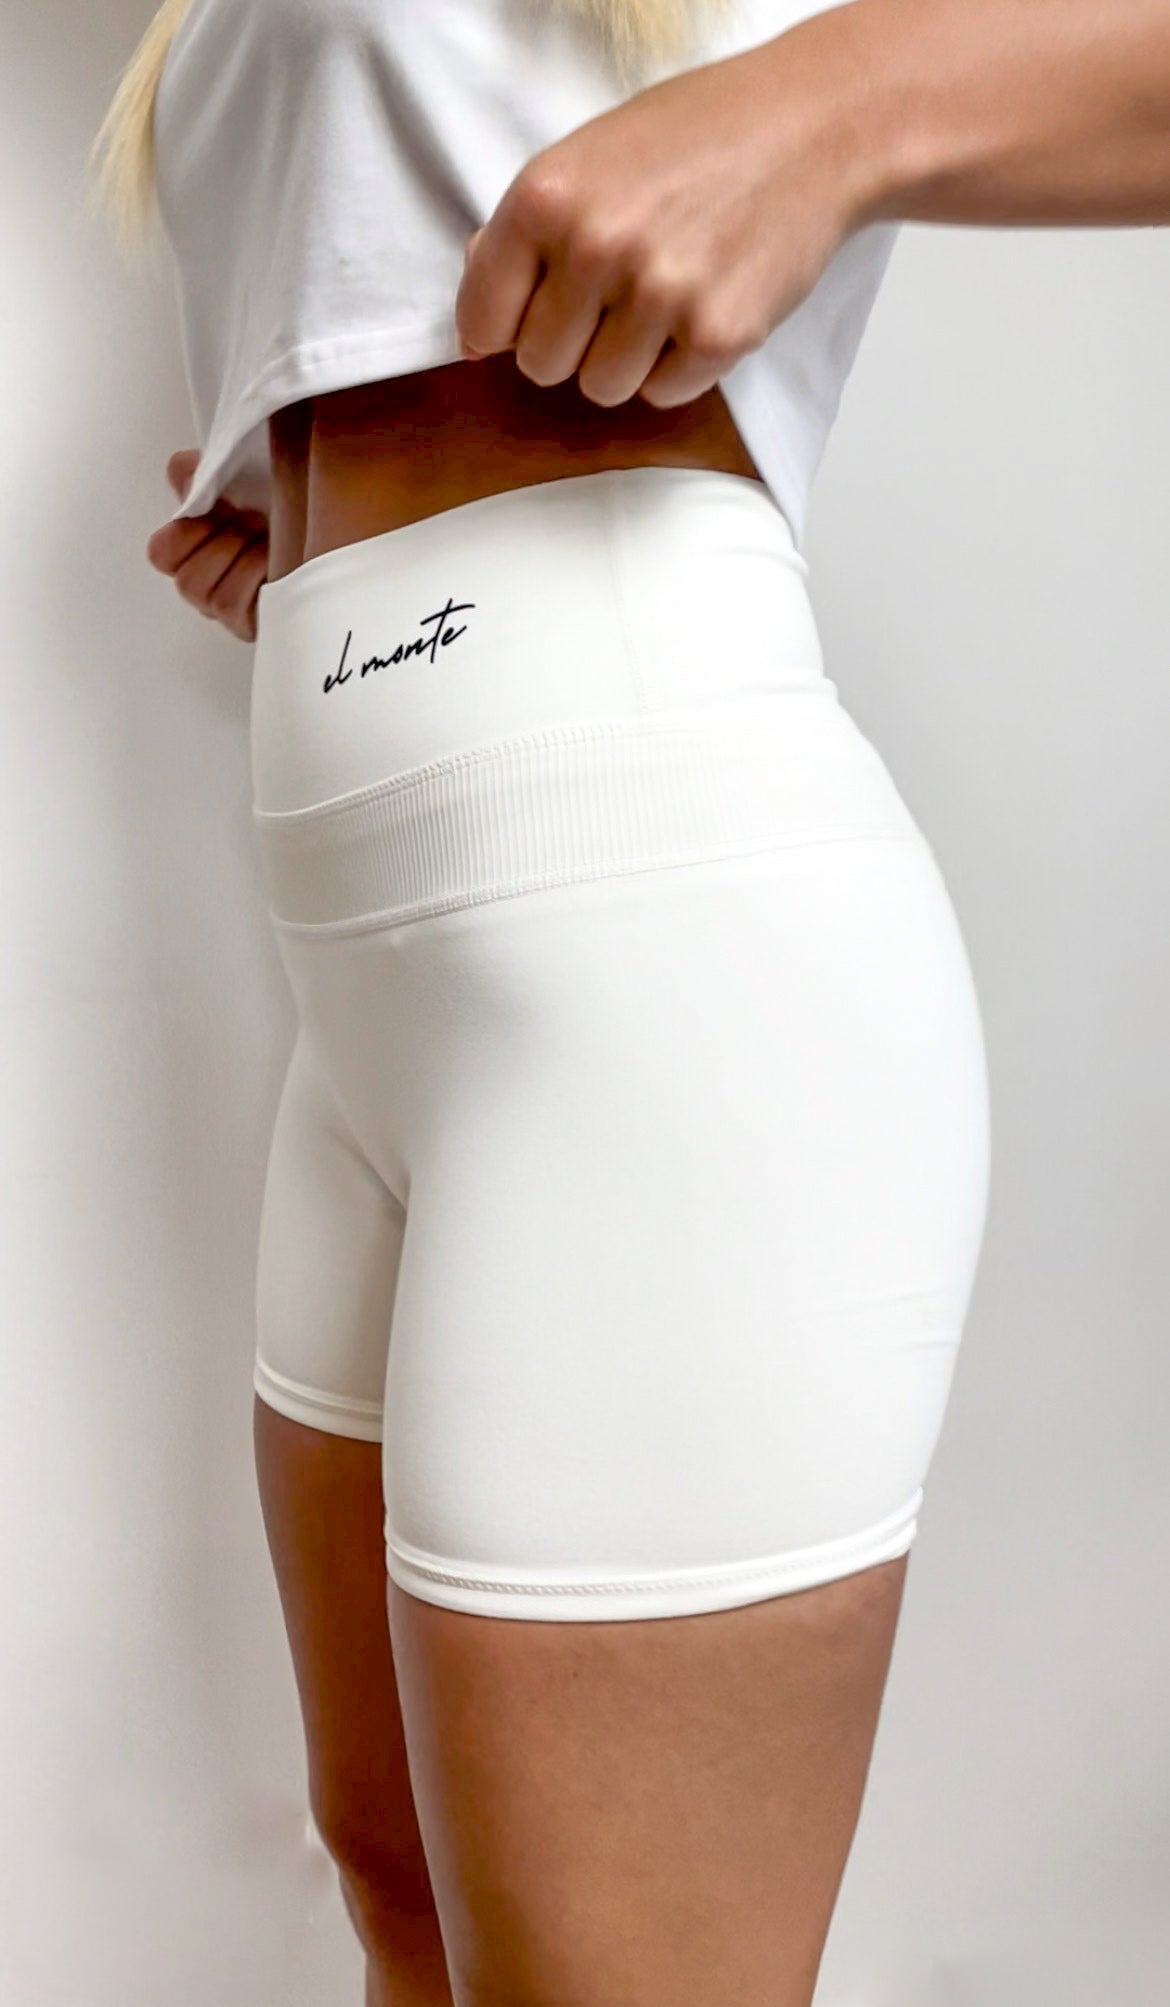 White Wideband short legging tights keeping up to date with women's Fashion